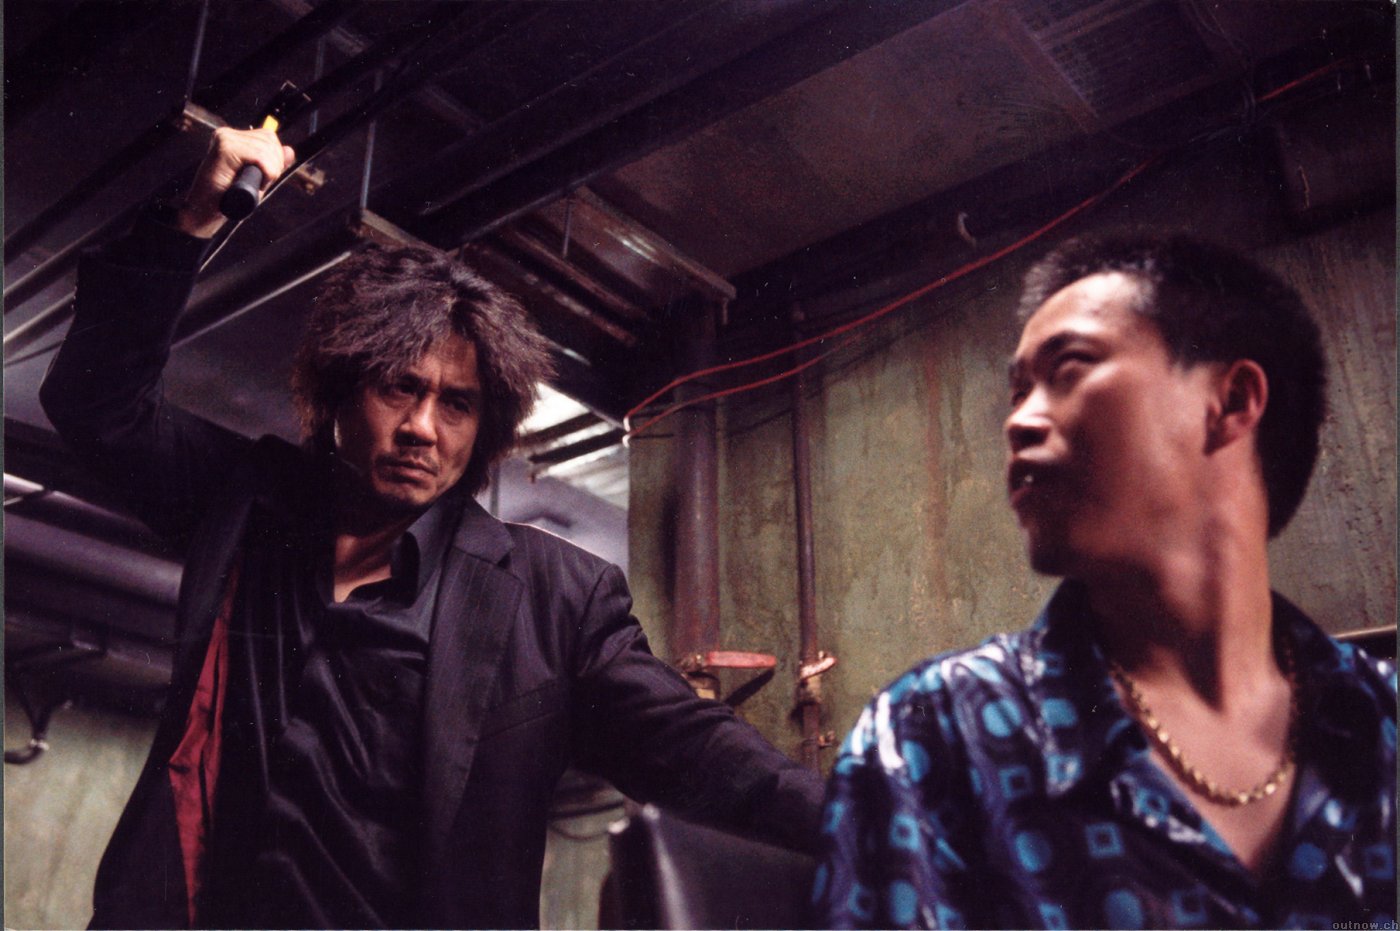 Oldboy      A man is kidnapped and imprisoned in a shabby cell for 15 years without explanation. He then is released, equipped with money, a cellphone and expensive clothes. As he strives to explain his imprisonment and get his revenge, Oh Dae-Su soon finds out that his kidnapper has a greater plan for him and is set onto a path of pain and suffering in an attempt to uncover the motive of his mysterious tormentor.